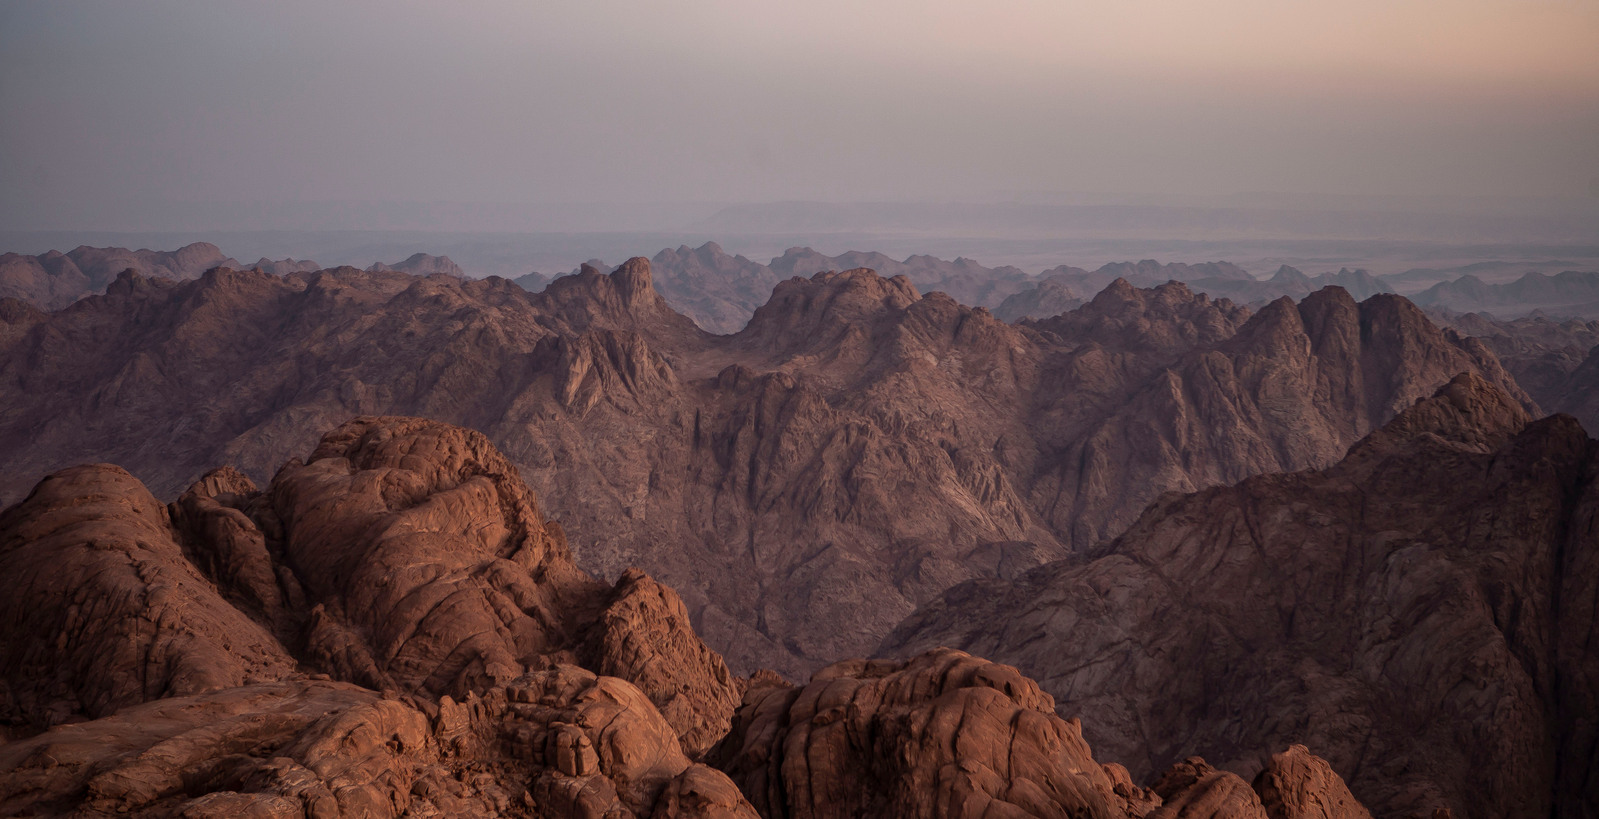 An early morning photographic view from the top of Mount Sinai in Egypt.